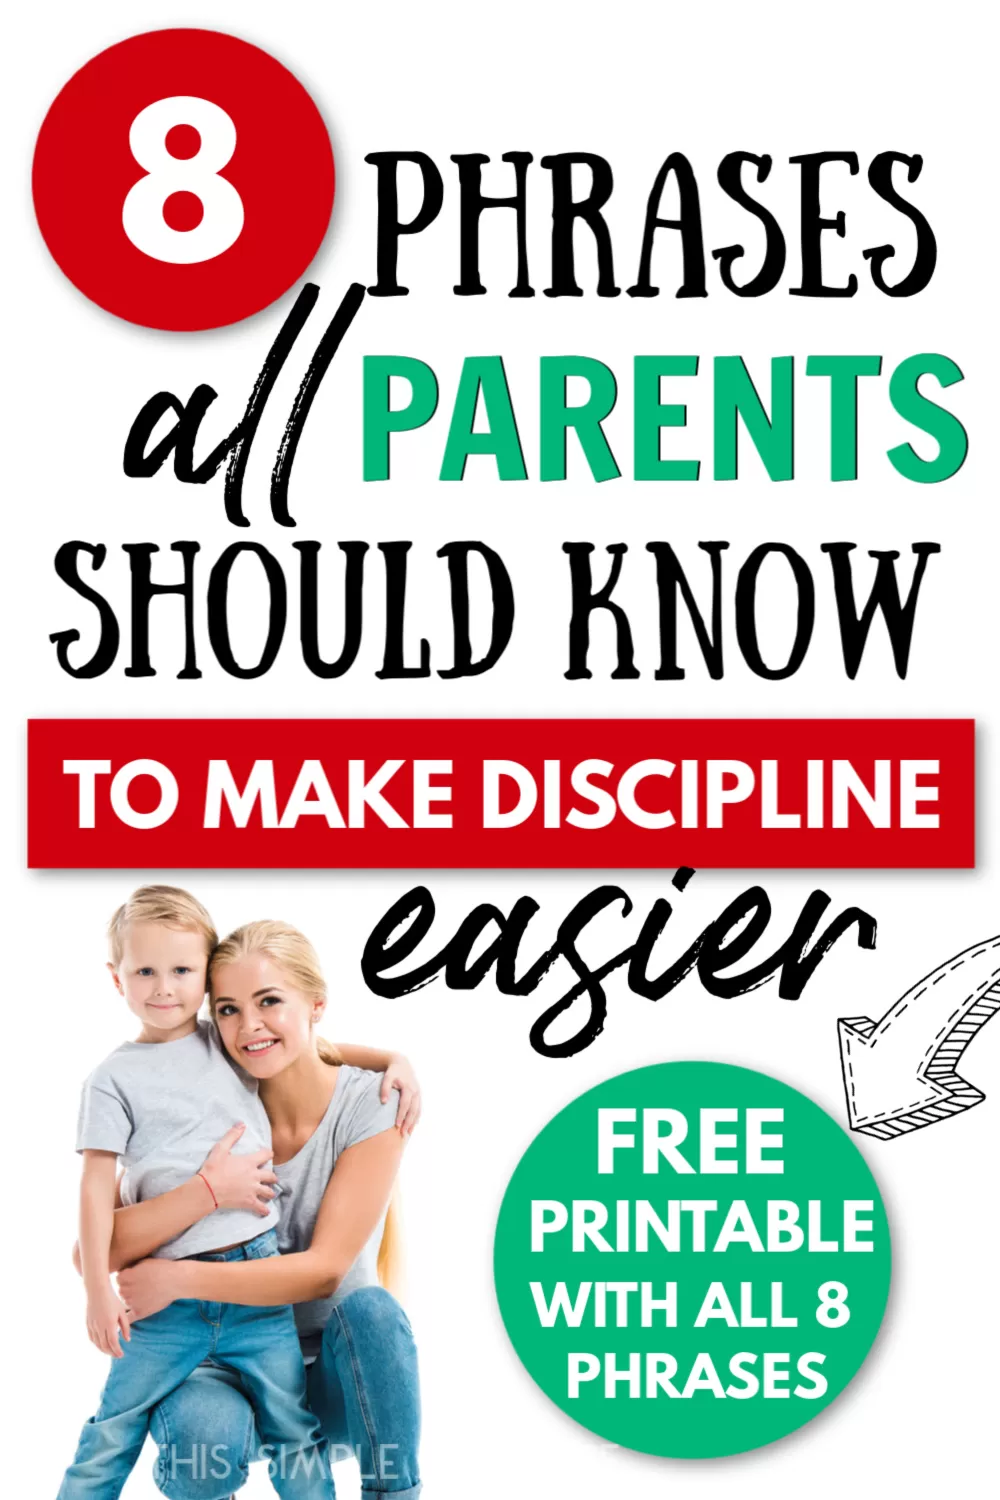 mom hugging child after discipline, with text overlay "8 phrases all parents should know to make discipline easier - free printable with all 8 phrases"